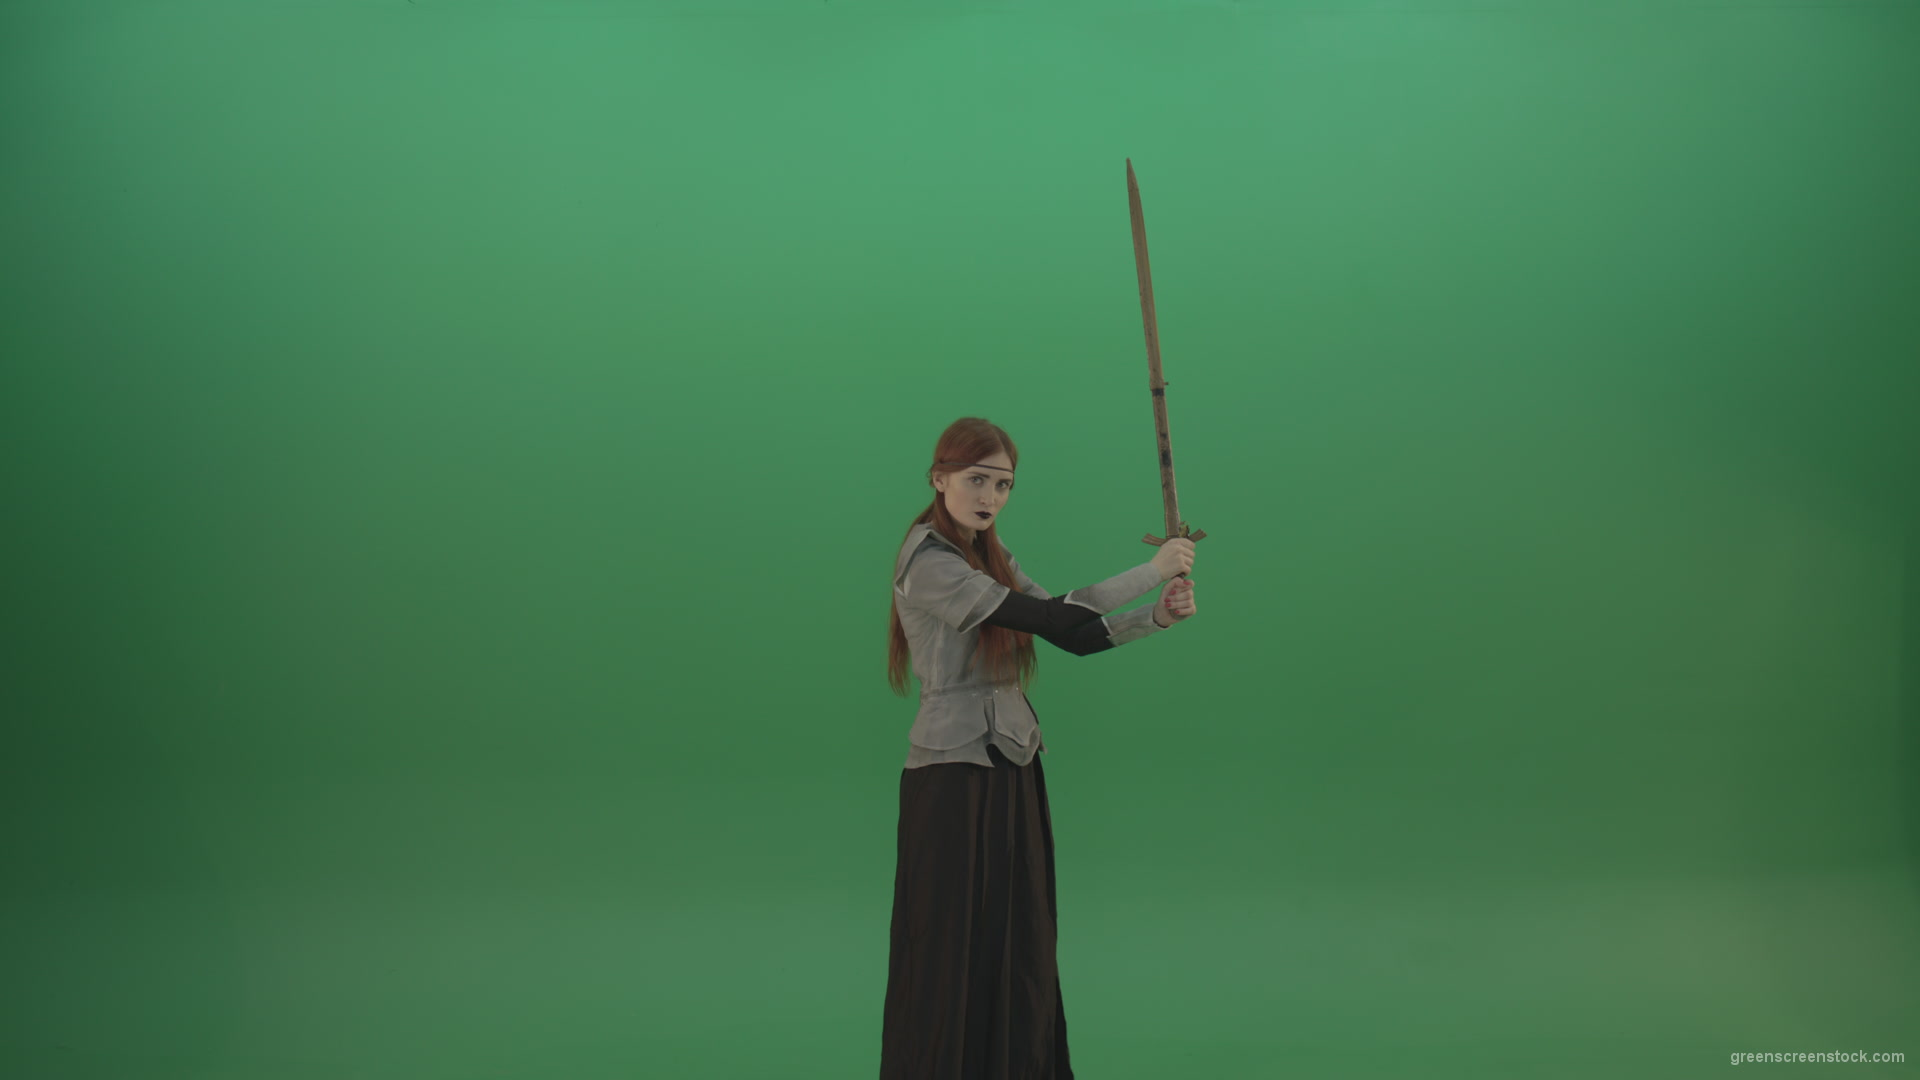 Swinging-on-a-green-background-with-a-sword-the-girl-gracefully-shows-her-strength_009 Green Screen Stock